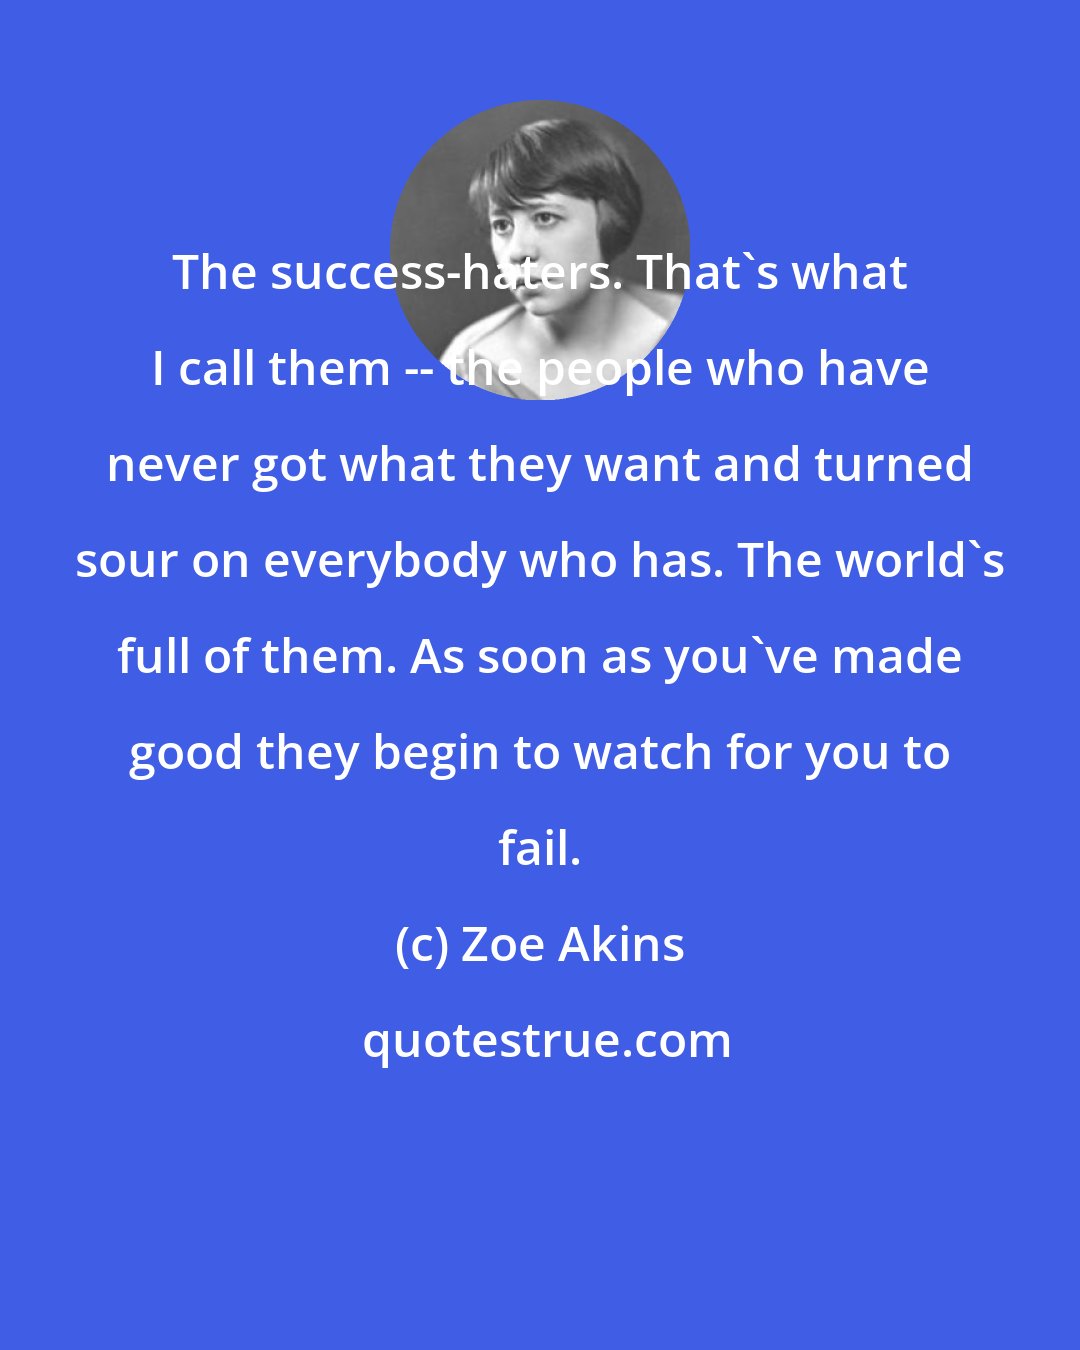 Zoe Akins: The success-haters. That's what I call them -- the people who have never got what they want and turned sour on everybody who has. The world's full of them. As soon as you've made good they begin to watch for you to fail.